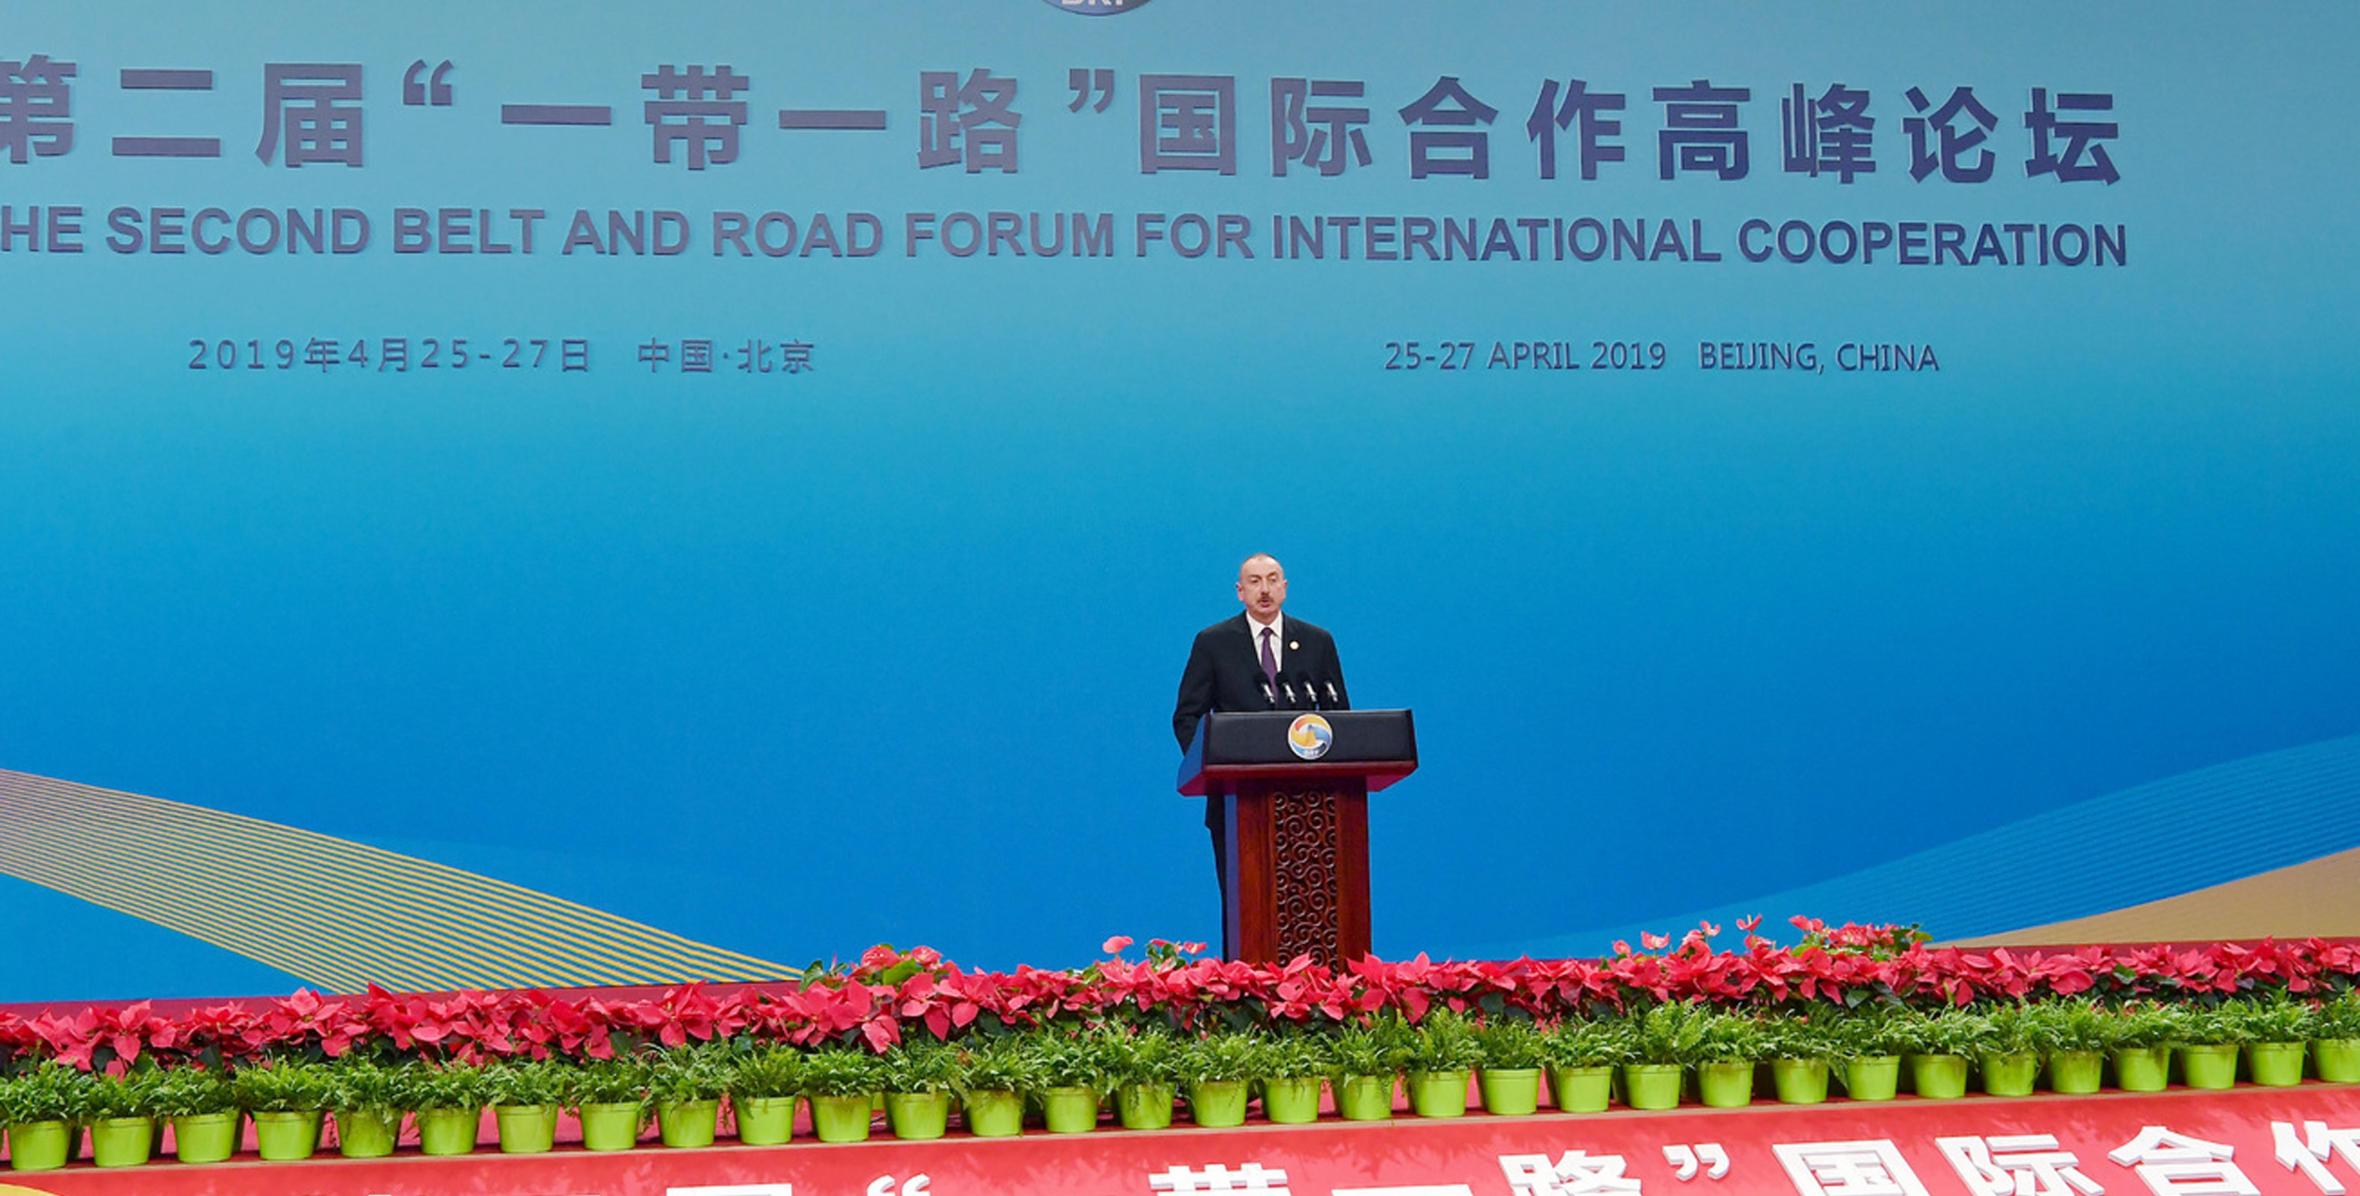 Speech by Ilham Aliyev at the 2nd "One Belt One Road" Forum in Beijing